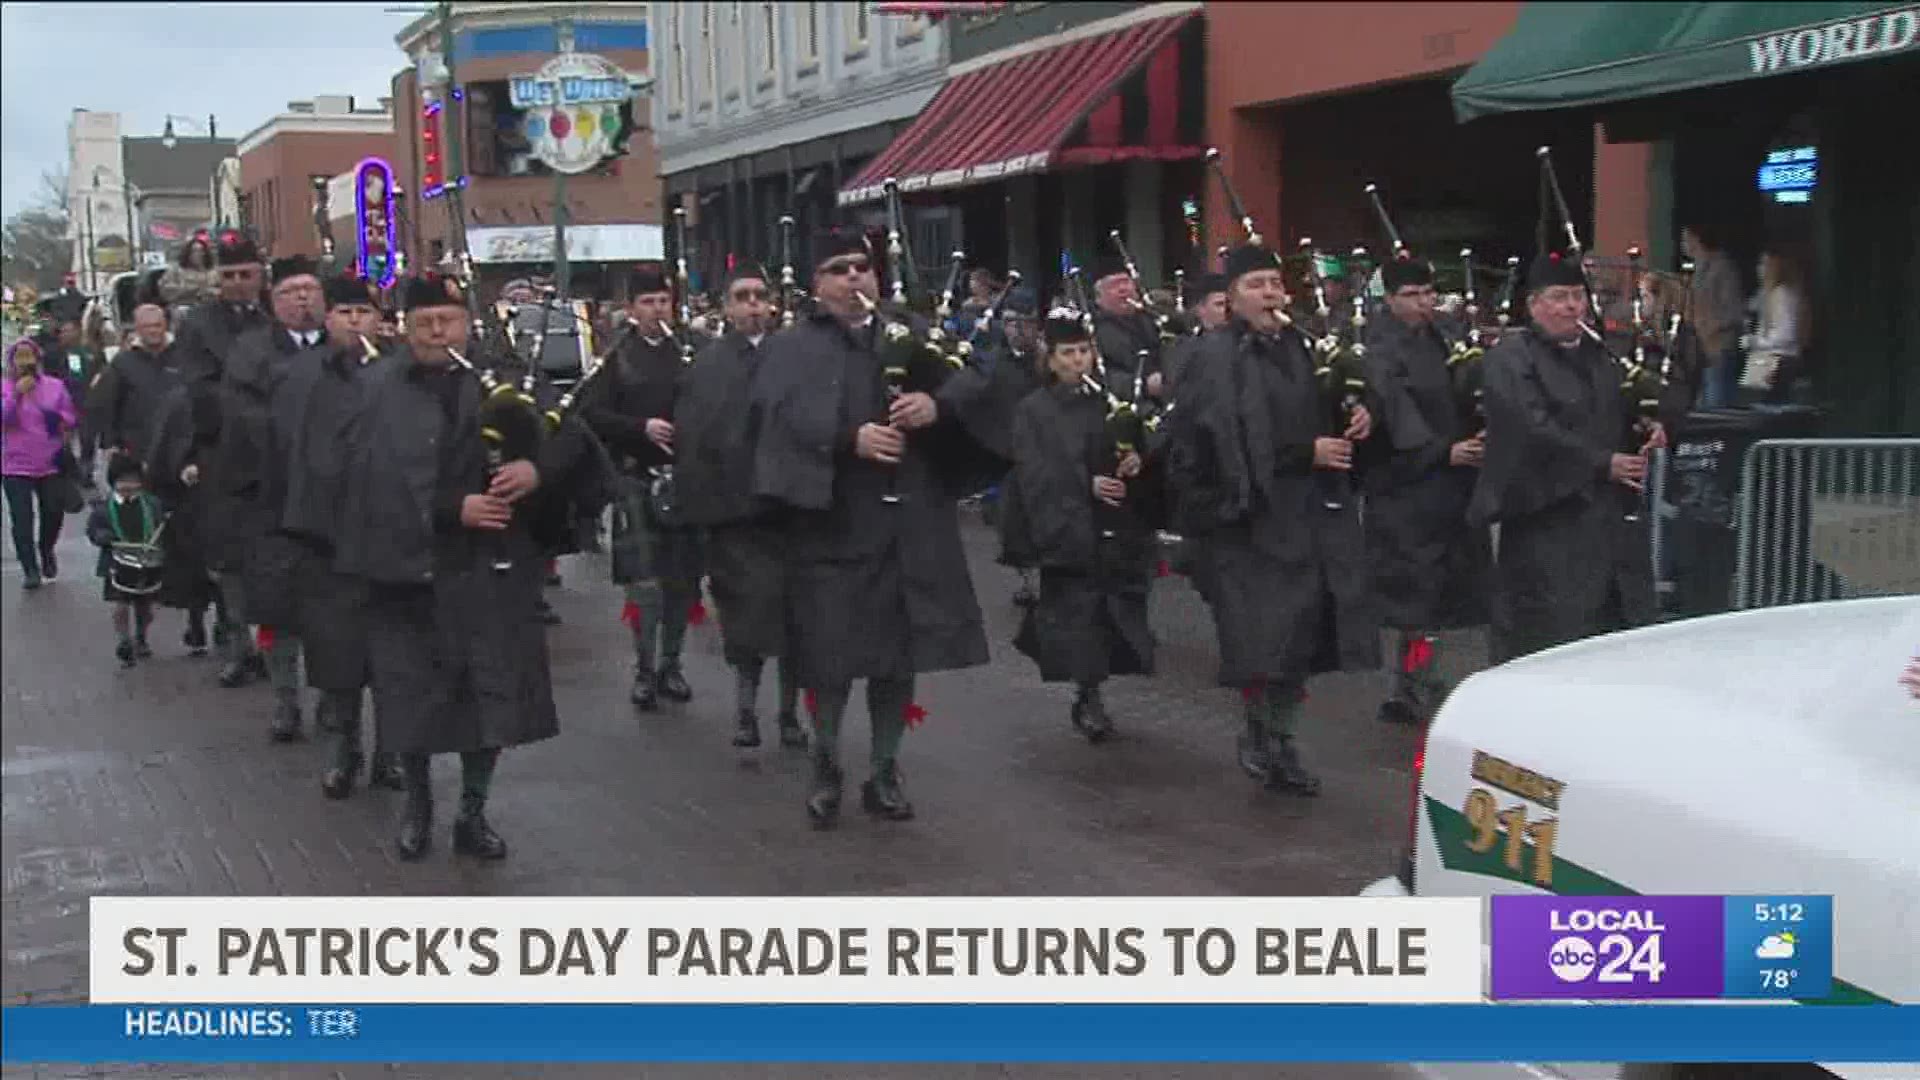 "Beale is Back" is the sentiment behind hosting a St. Patty's parade in May.